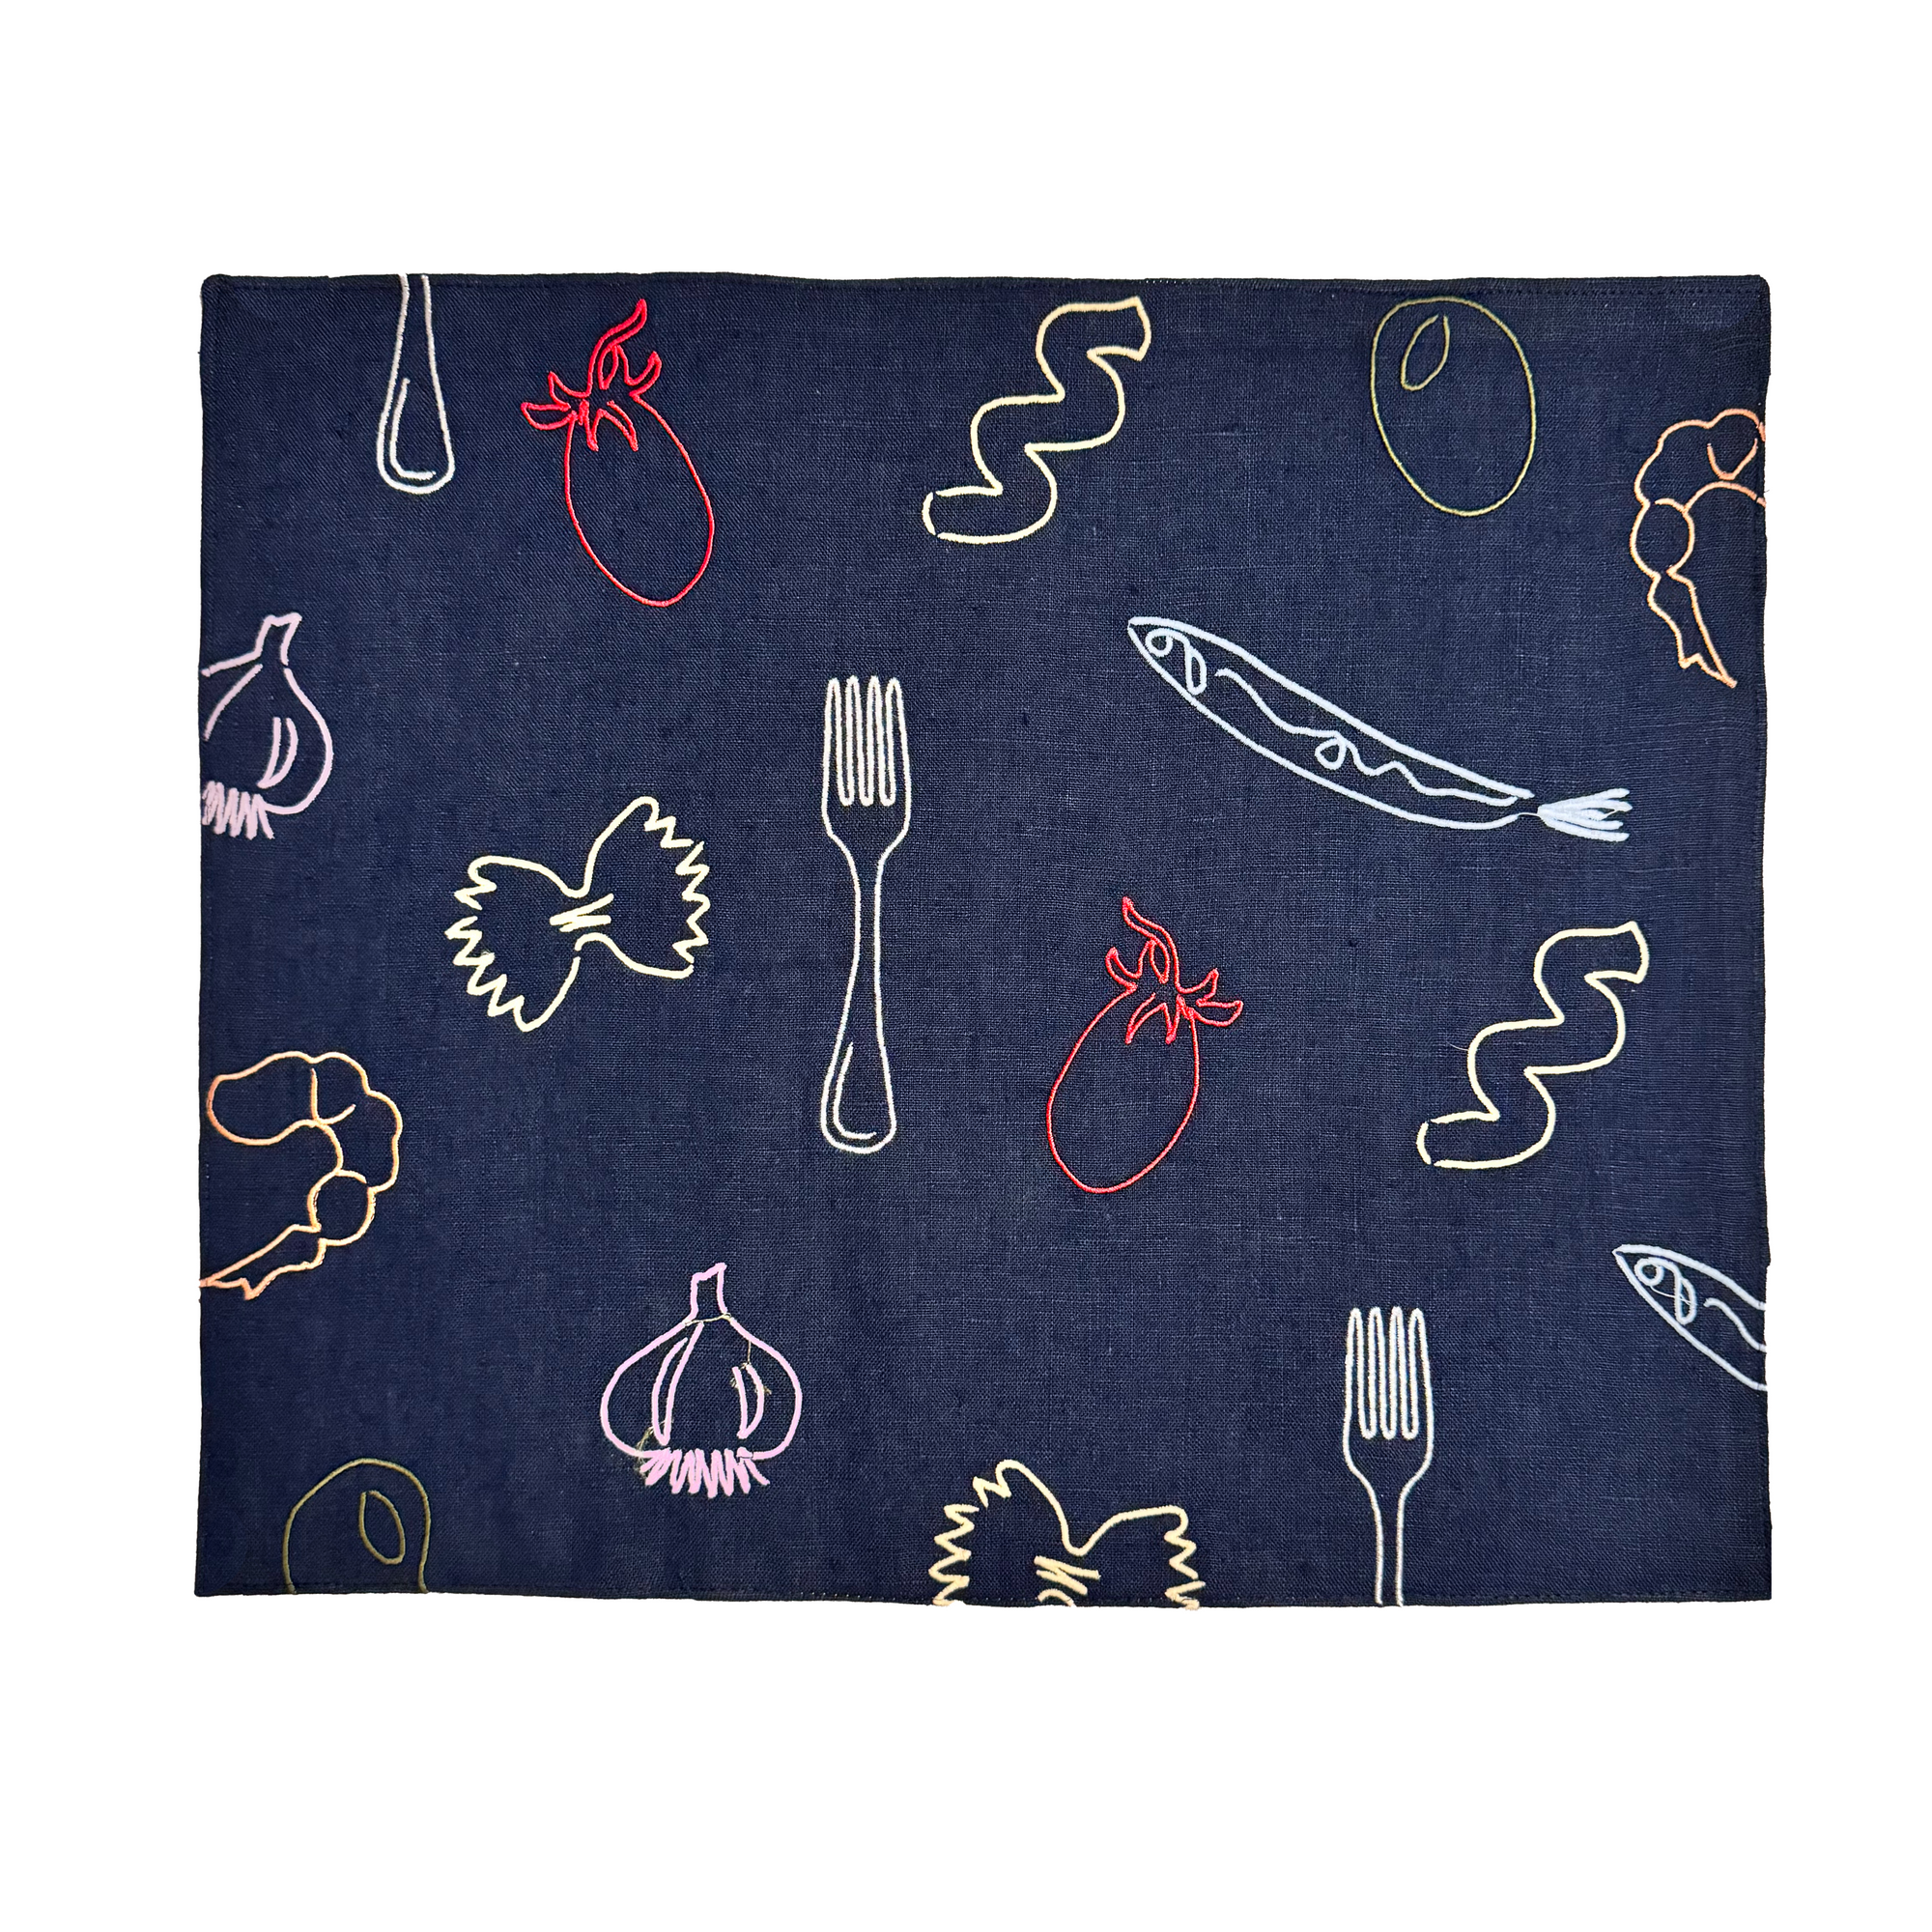 Pantry Linen Placemats, set of 4